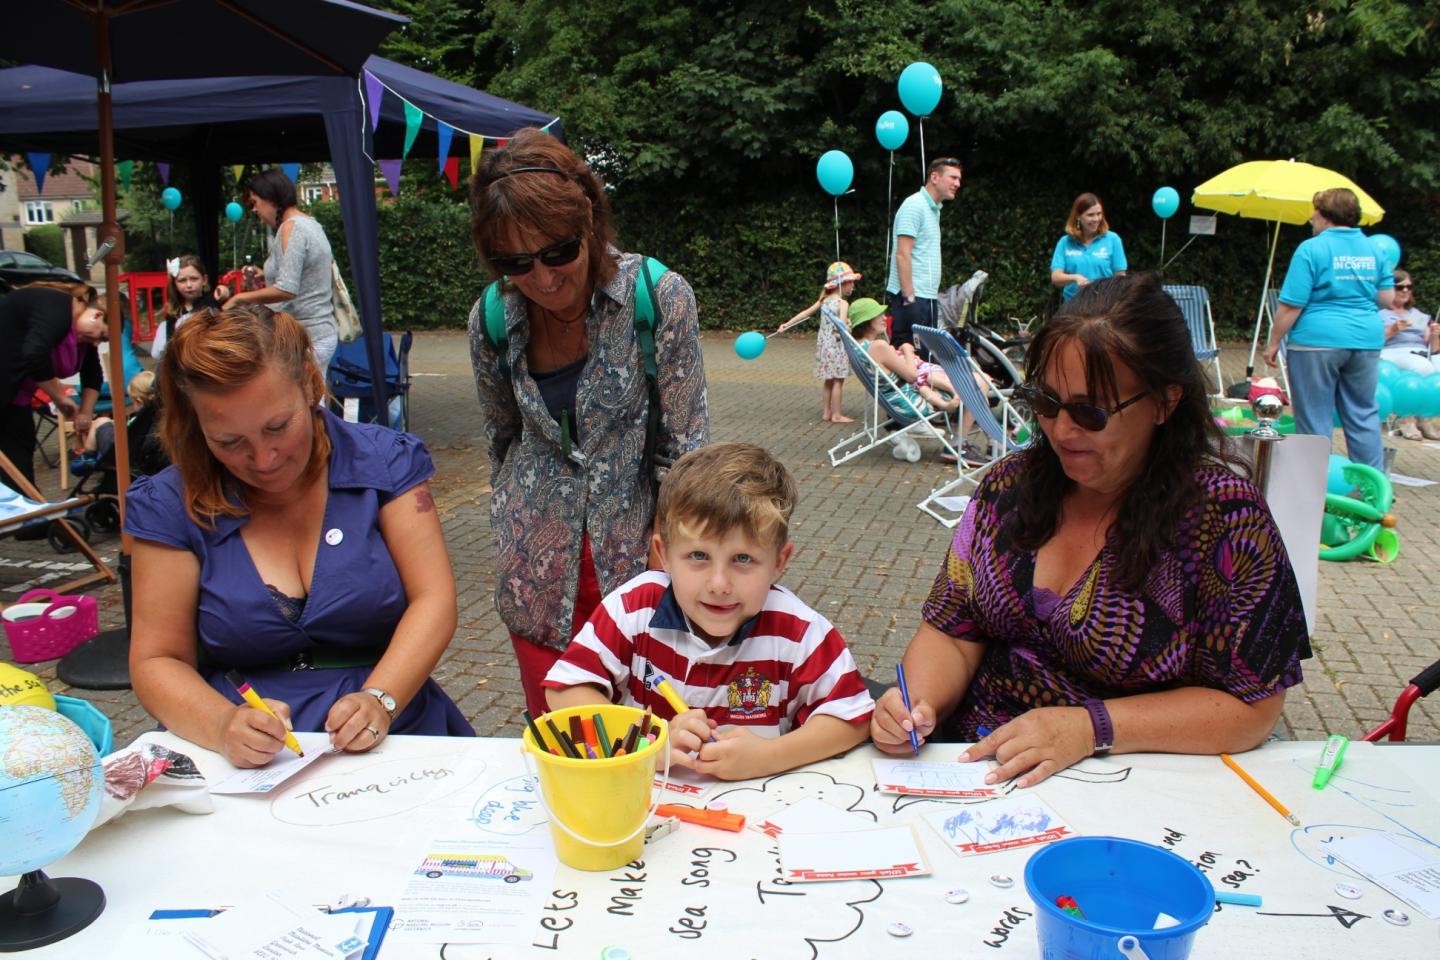 Participants engaging with the Maritime Memories Machine by drawing their connection to the sea at Sailors' Society, Southampton.